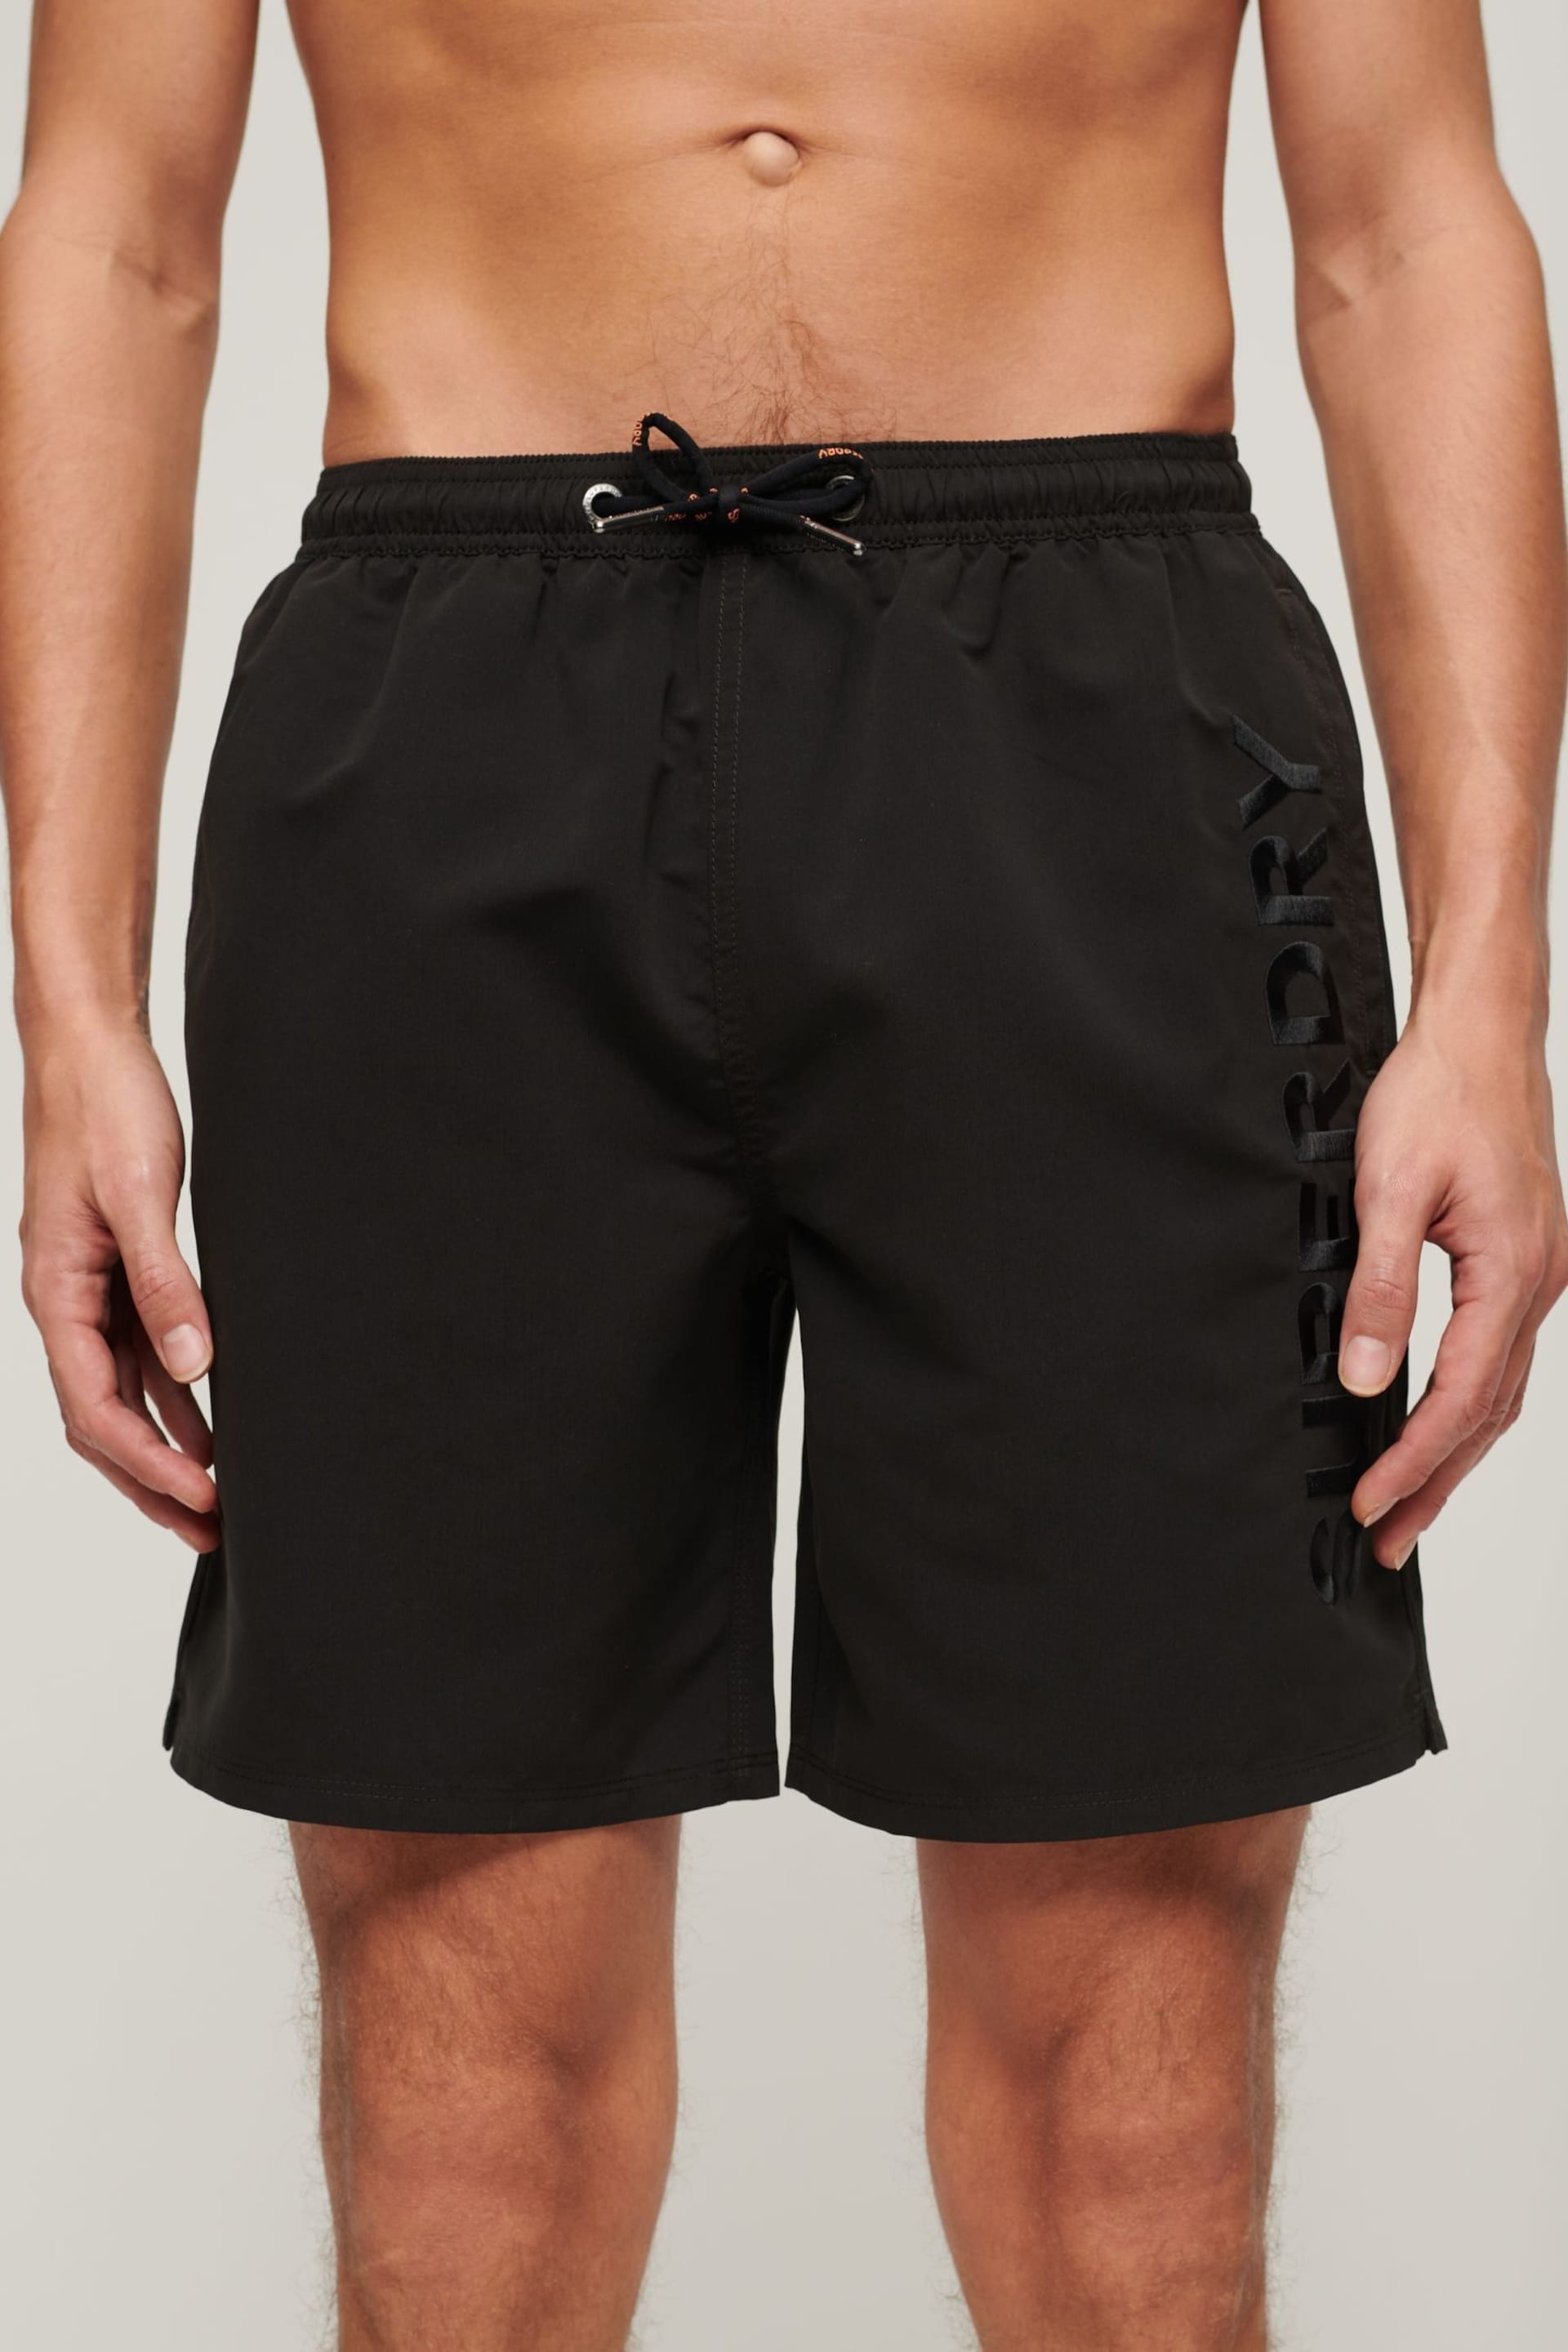 Superdry Black Sport Graphic 17 Inch Recycled Swim Shorts - Image 1 of 1